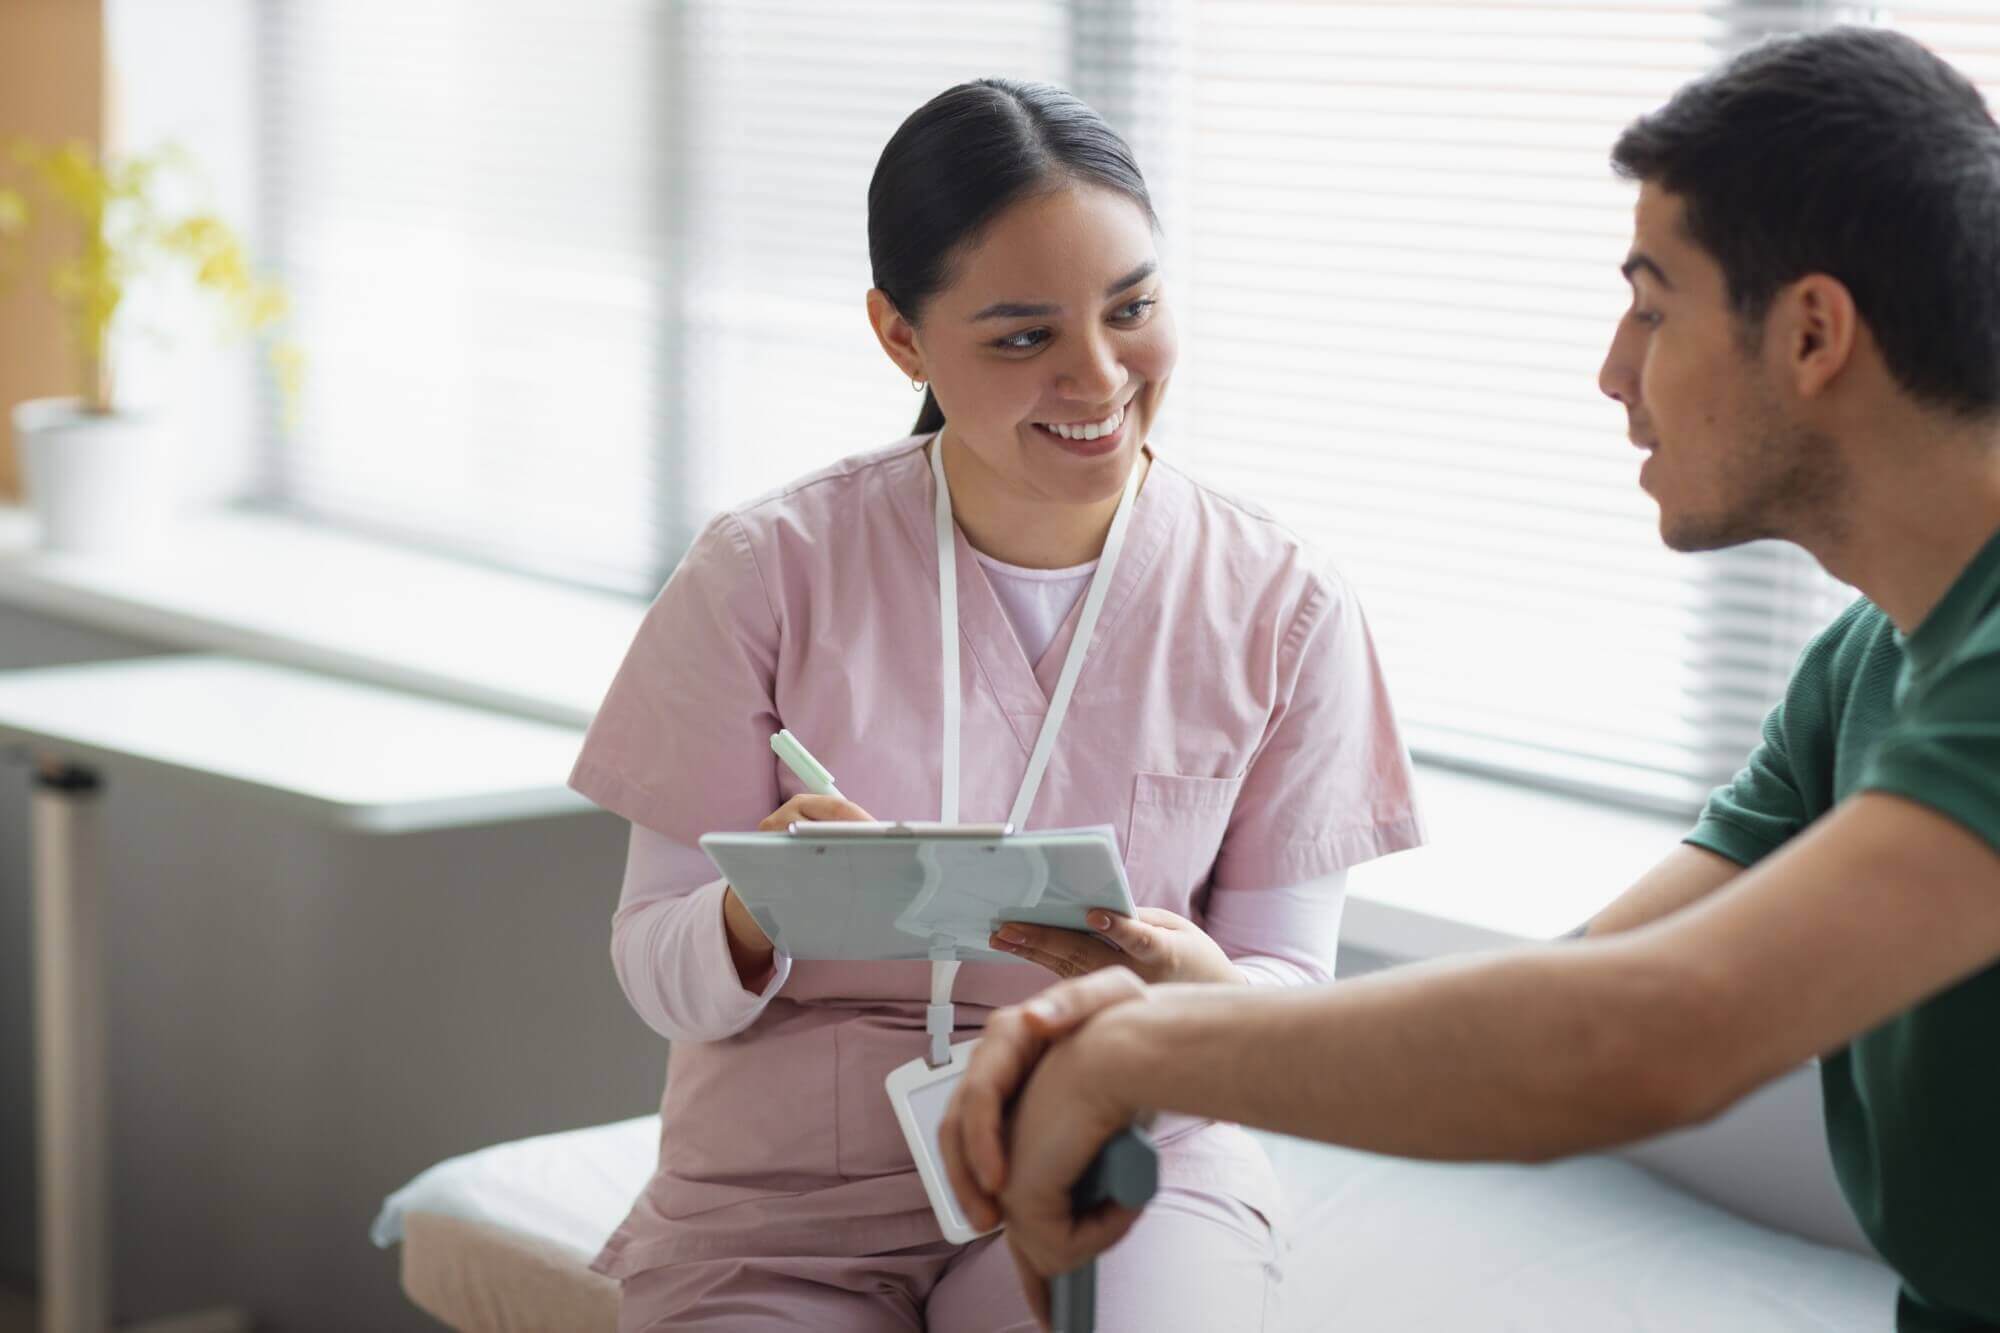 Healthway Medical Network | Breaking Down Healthcare Barriers: How Oncology Nurse Navigators Help Patients and Caregivers in Their Cancer Journey